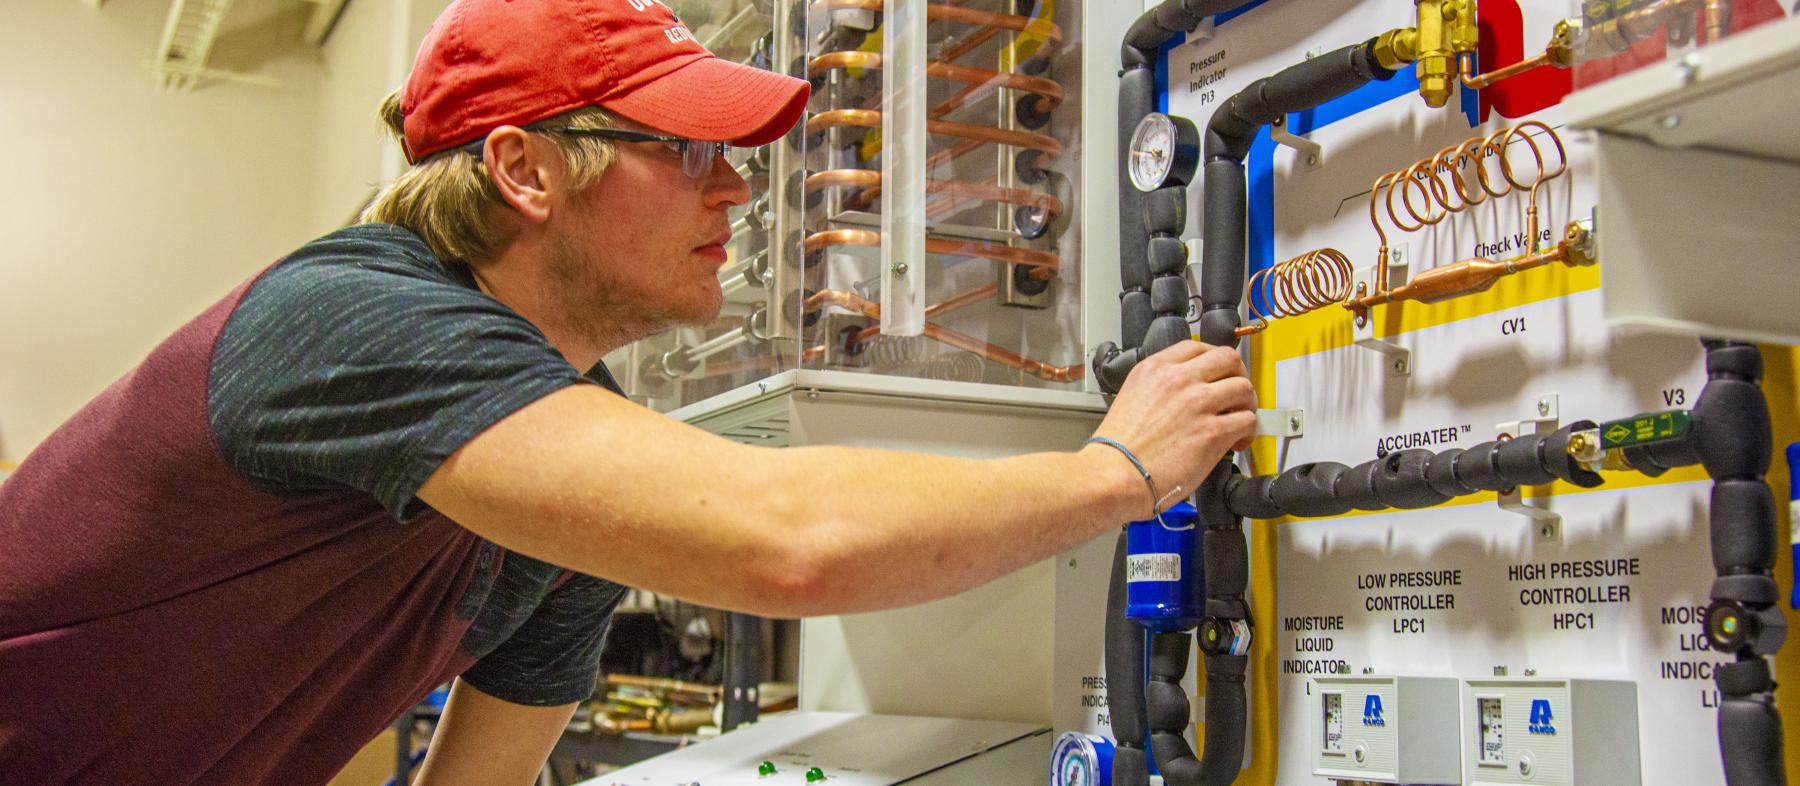 A student configures valves on a practice board in a lab